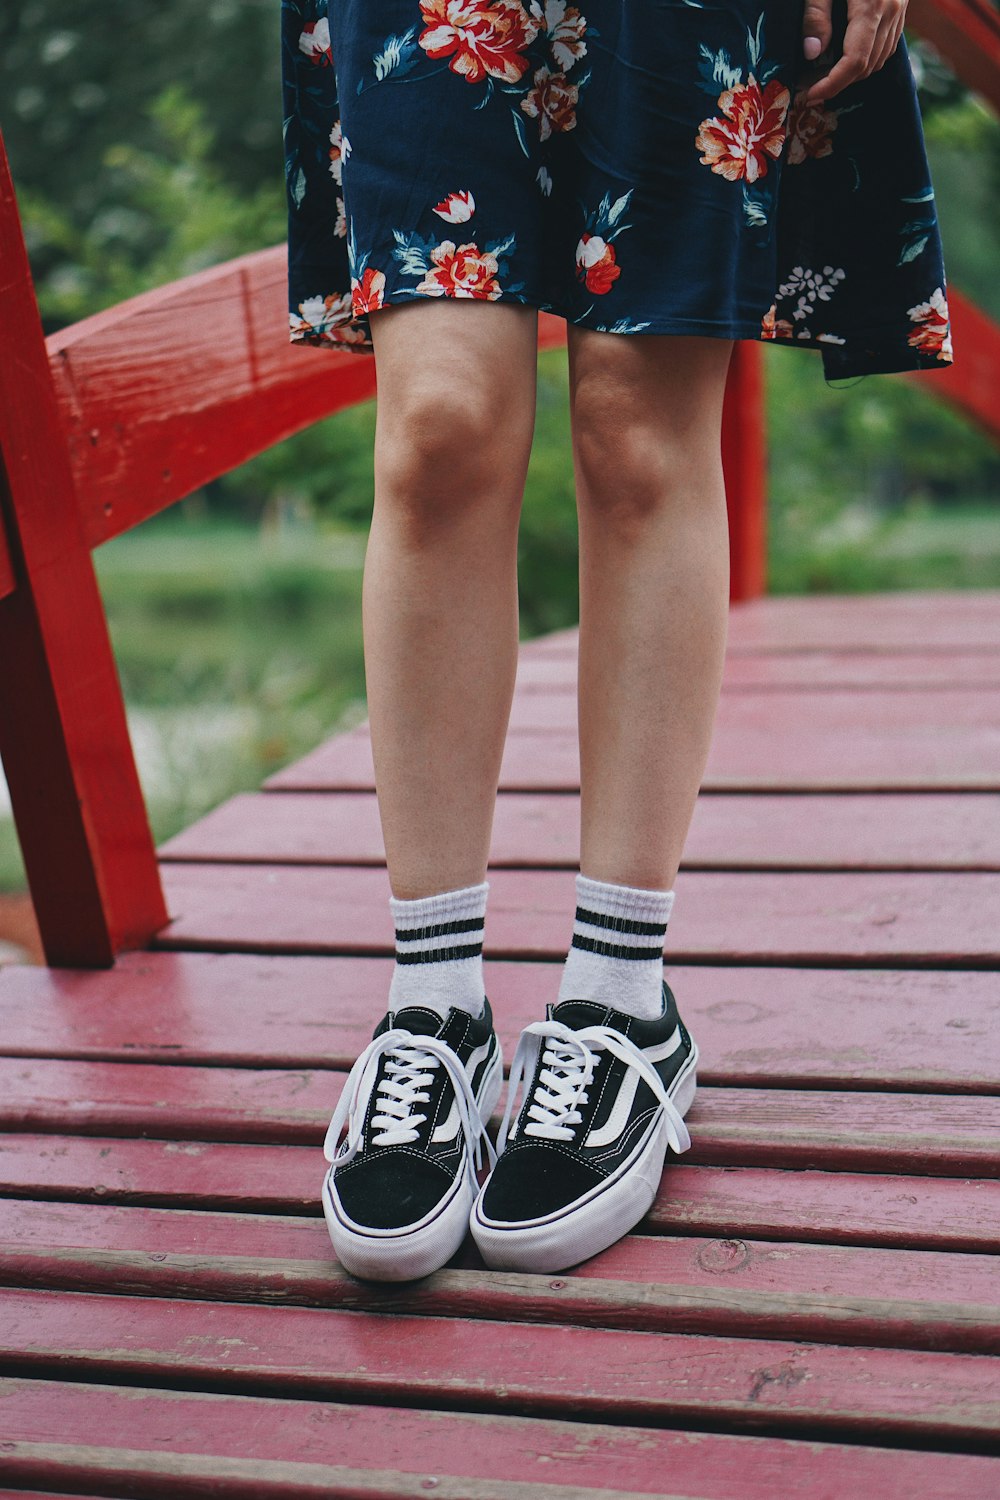 person wearing white-and-black Vans shoes photo – Free Image on Unsplash